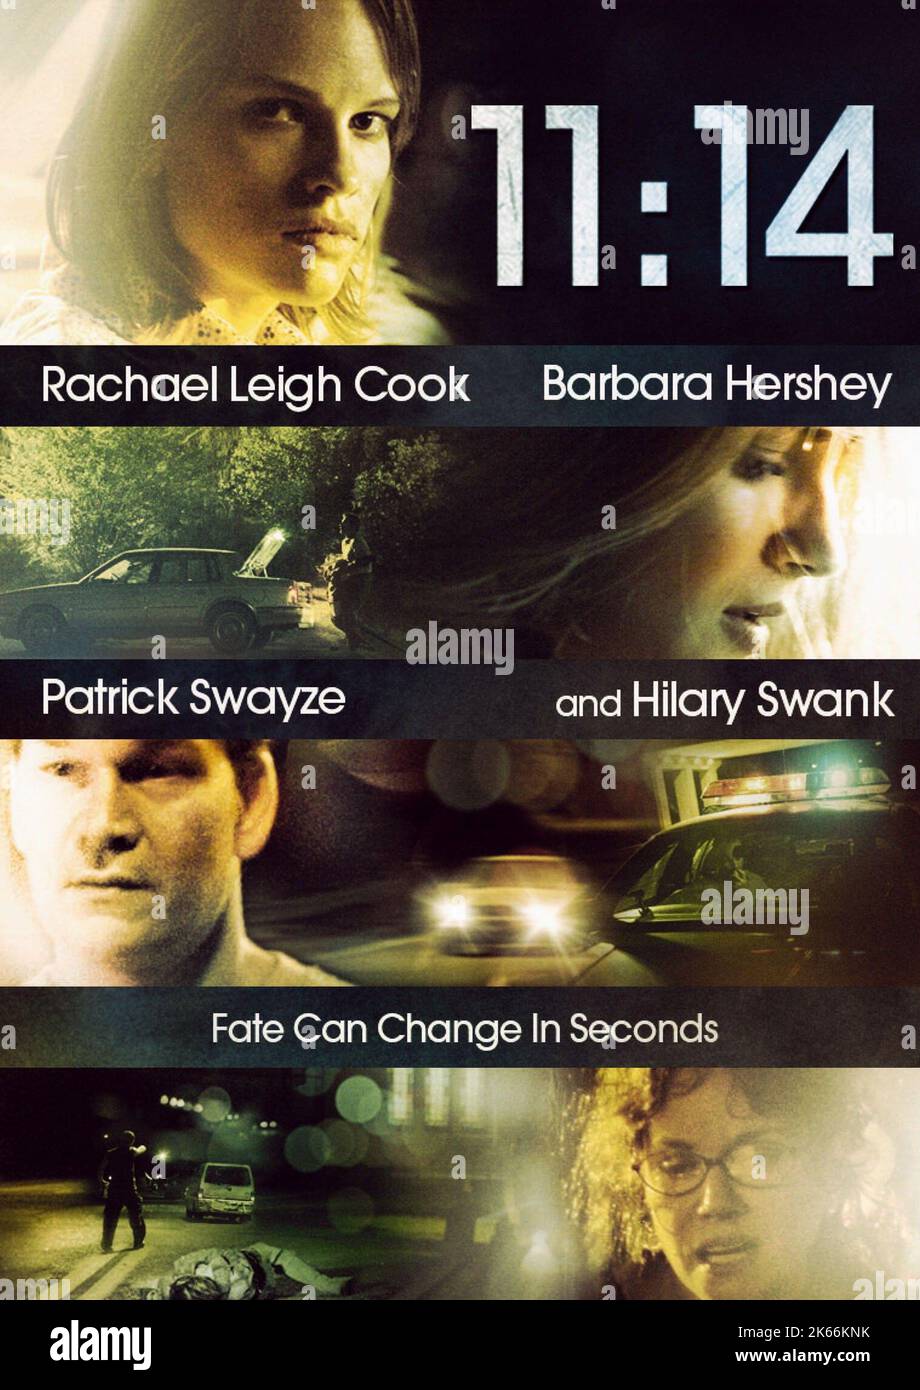 HILARY SWANK, Rachael Leigh Cook, Patrick Swayze, Barbara Hershey, affiche 11:14, 2003 Banque D'Images